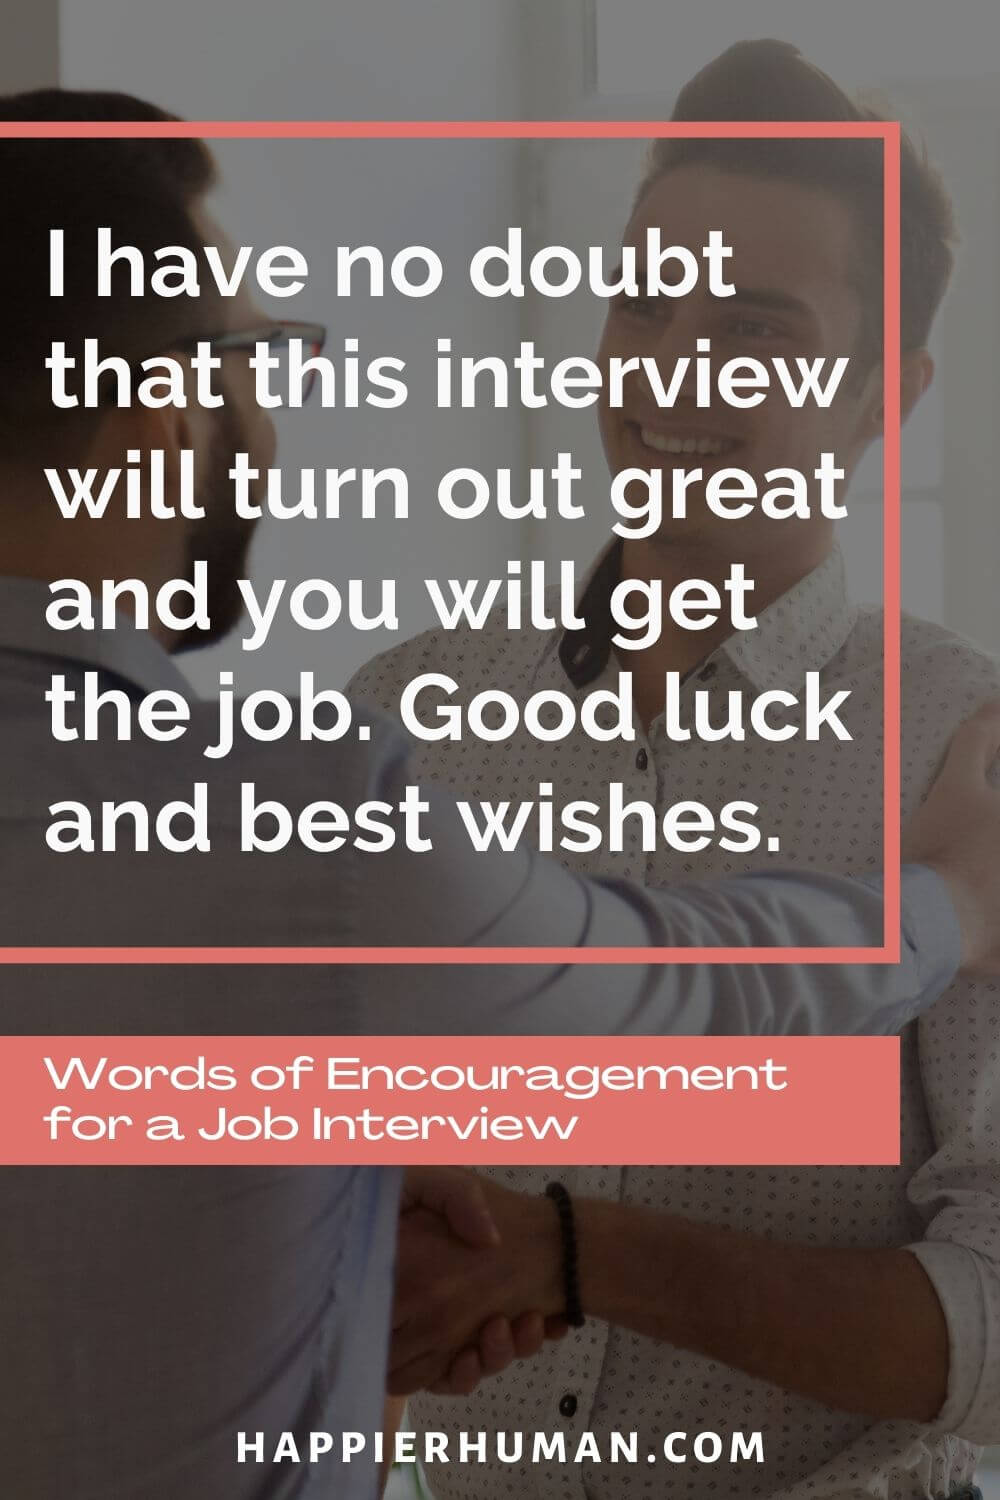 Words of Encouragement for Job Interview - I have no doubt that this interview will turn out great and you will get the job. Good luck and best wishes. | quotes to end a job interview | interview wishes for friend | job interview captions for instagram